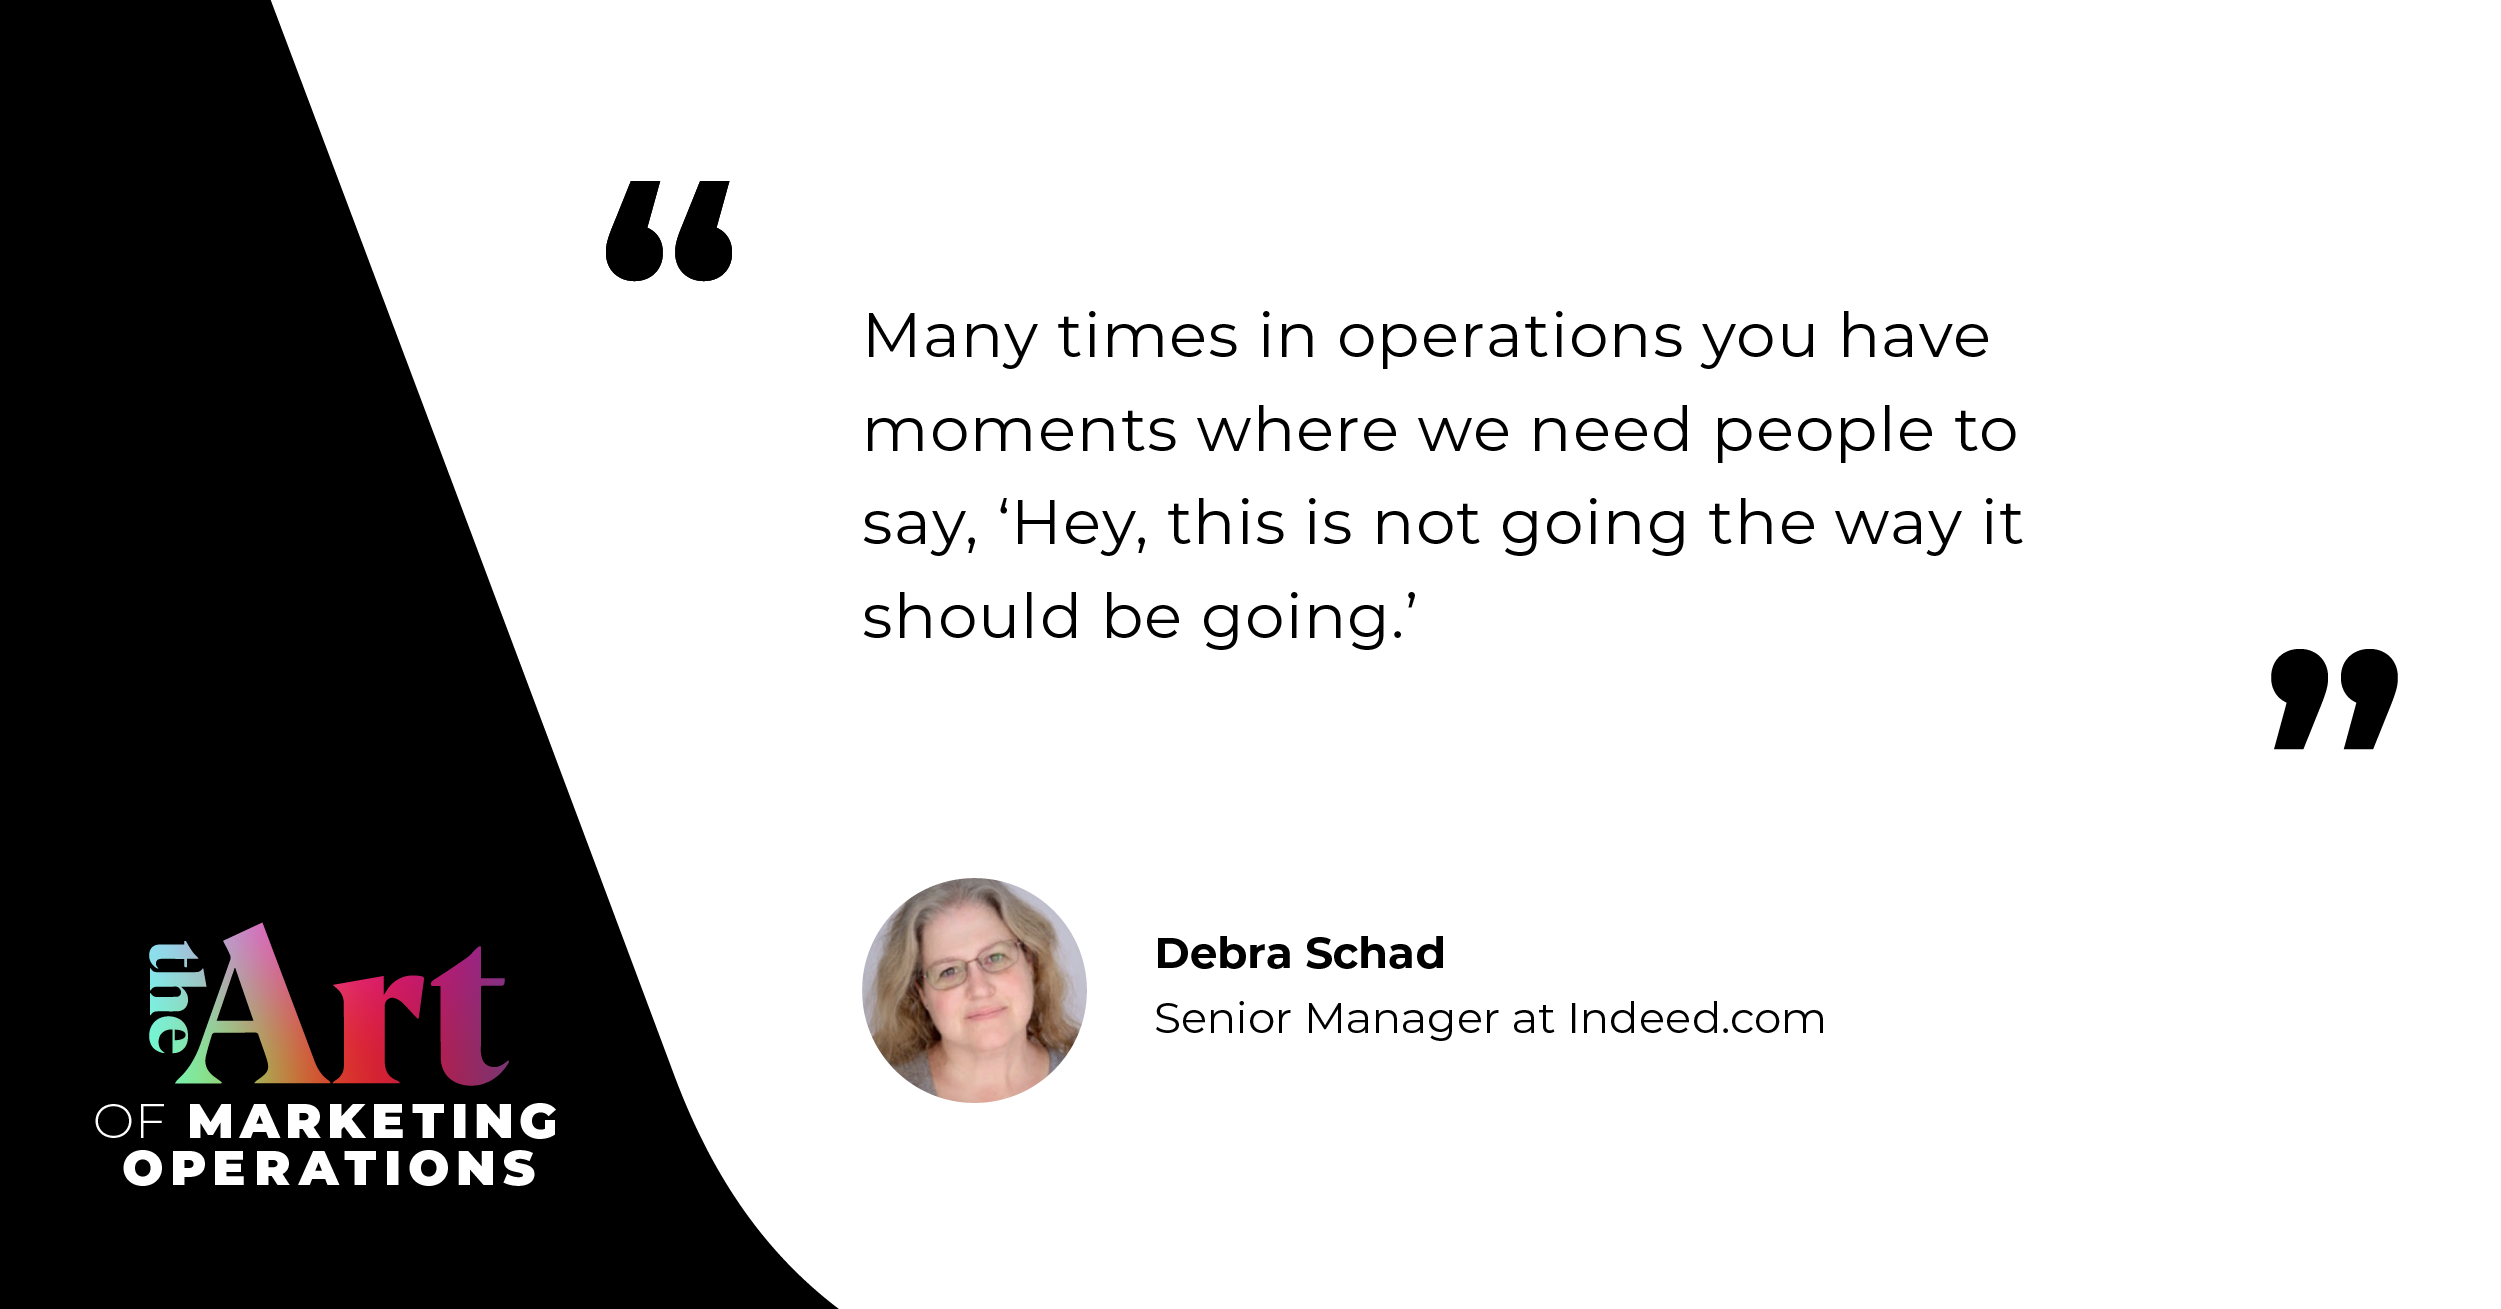 “Many times in operations you have moments where we need people to say, ‘Hey, this is not going the way it should be going.’”  — Debra Schad